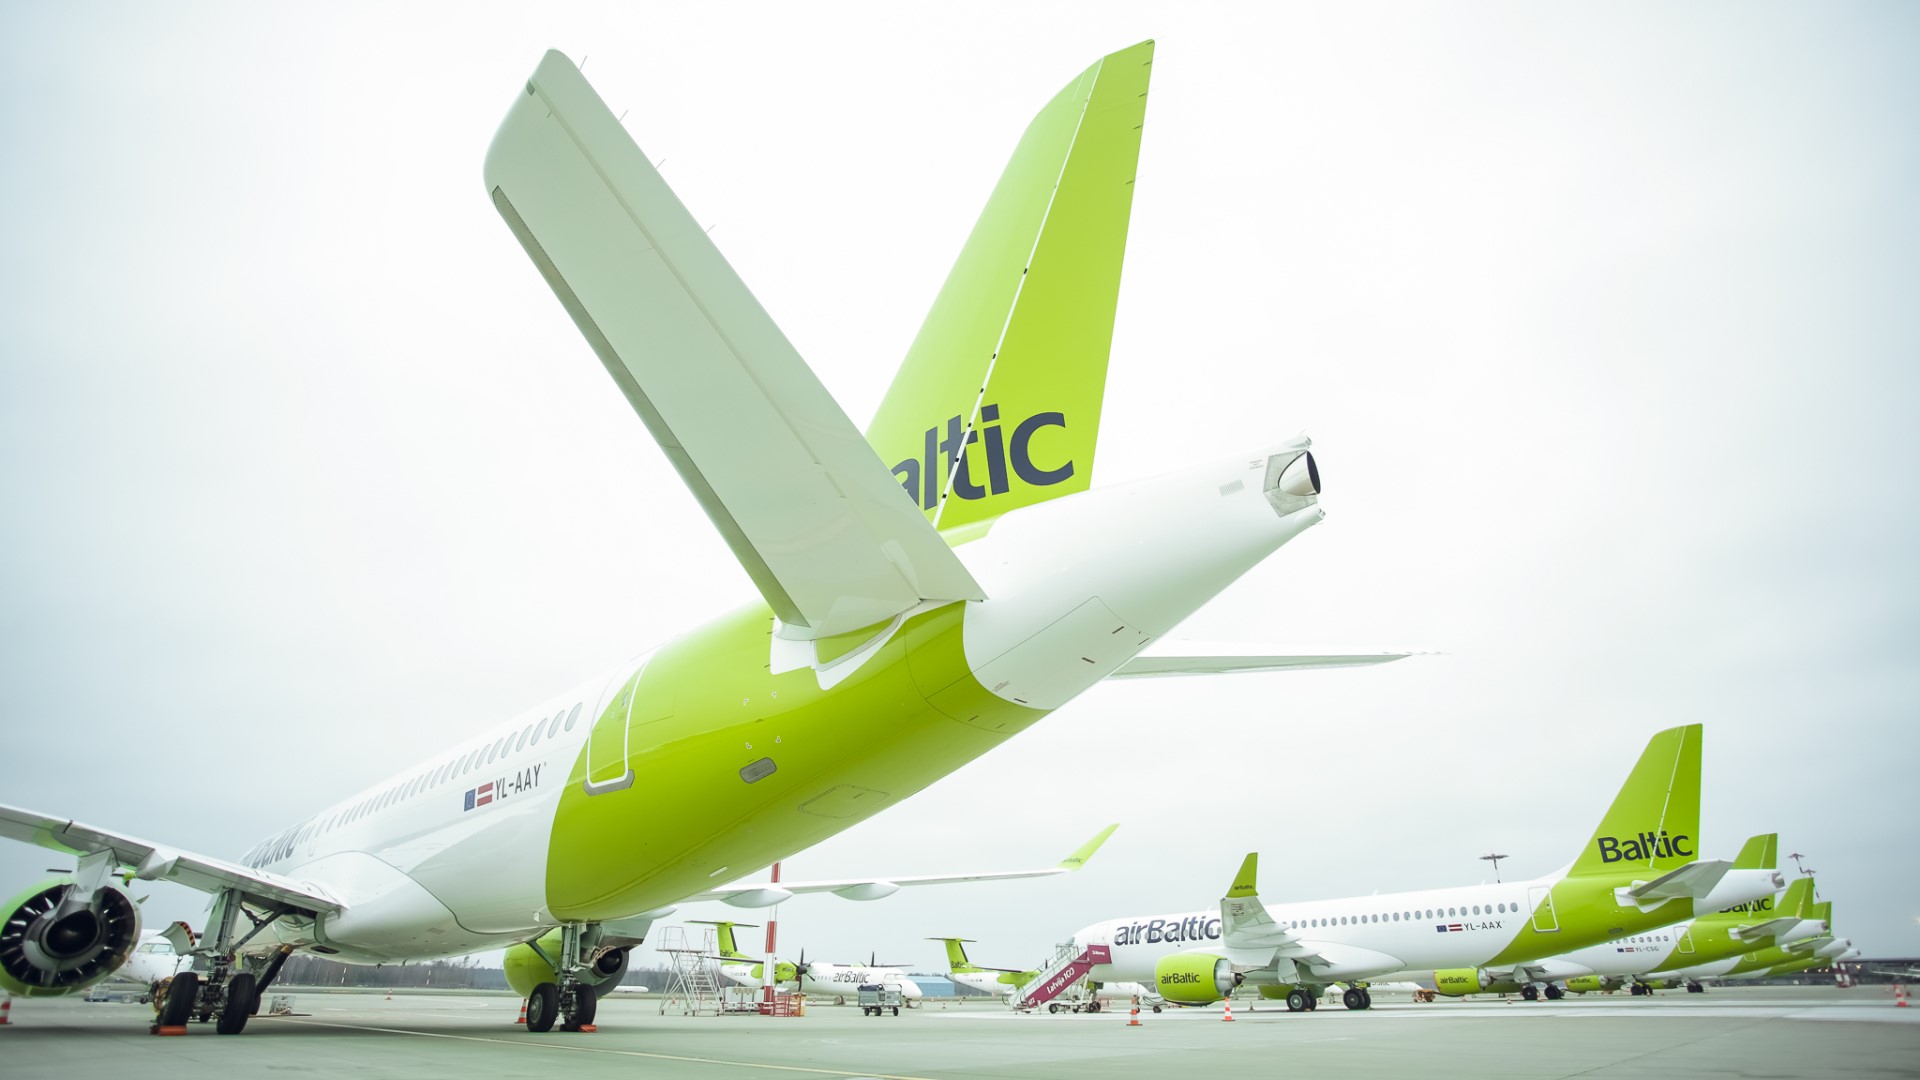 airBaltic planes named after Latvian cities - airBaltic blog